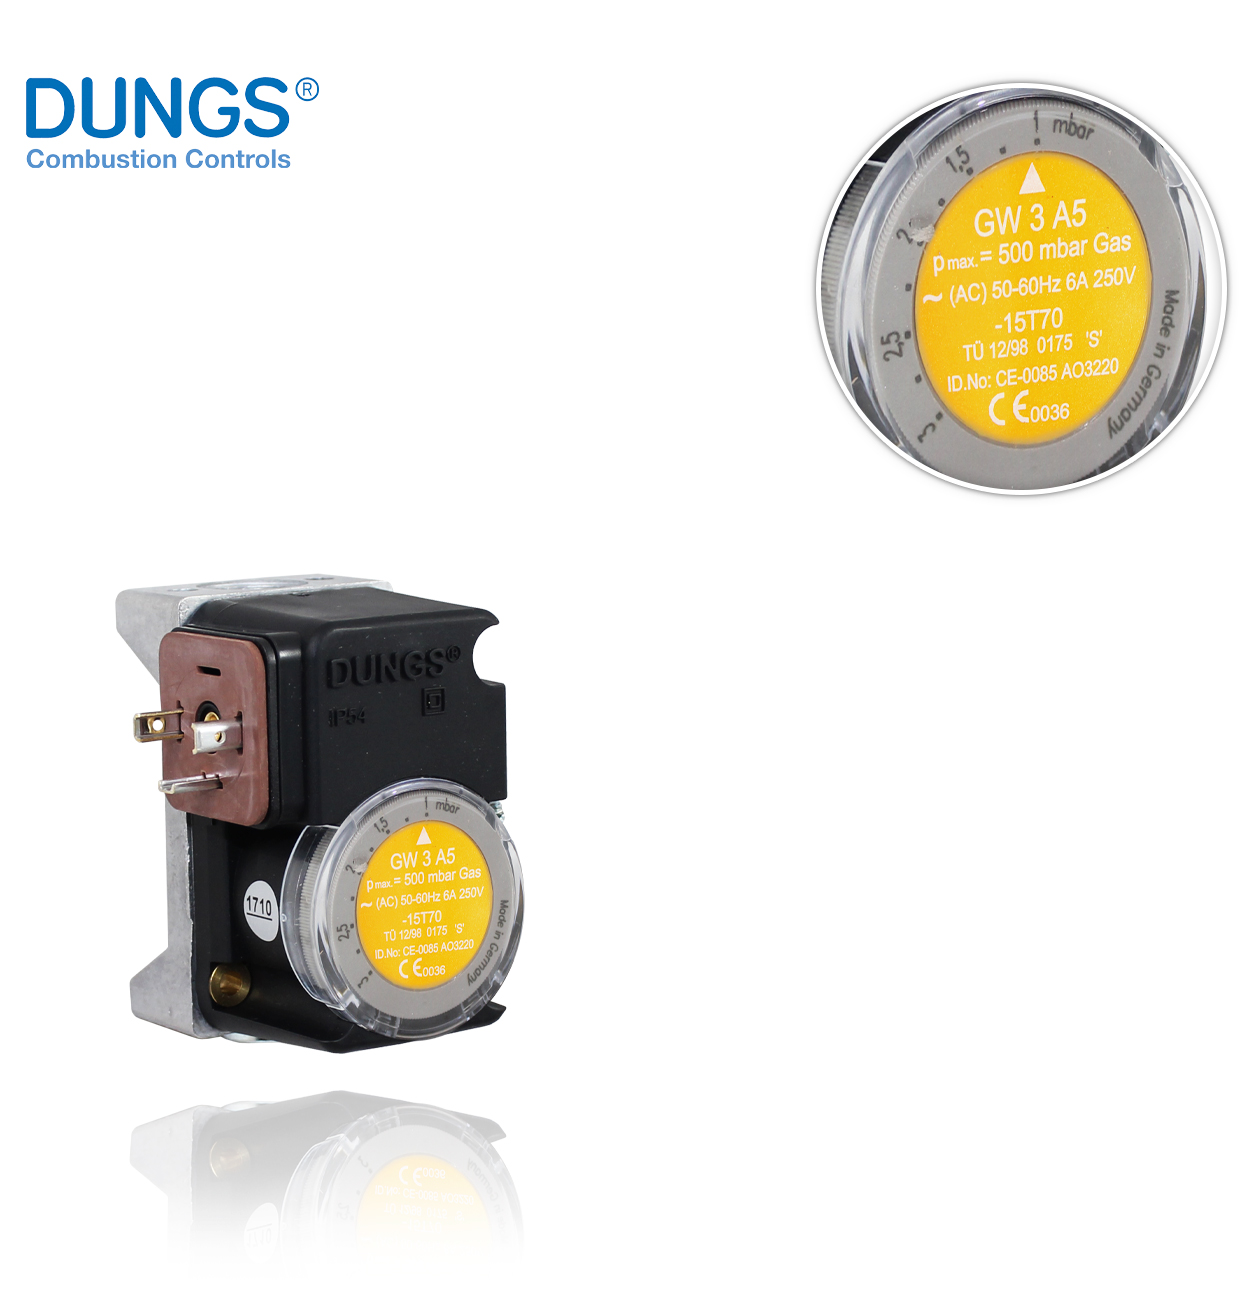 GW 3 A5 DUNGS PRESSURE SWITCH